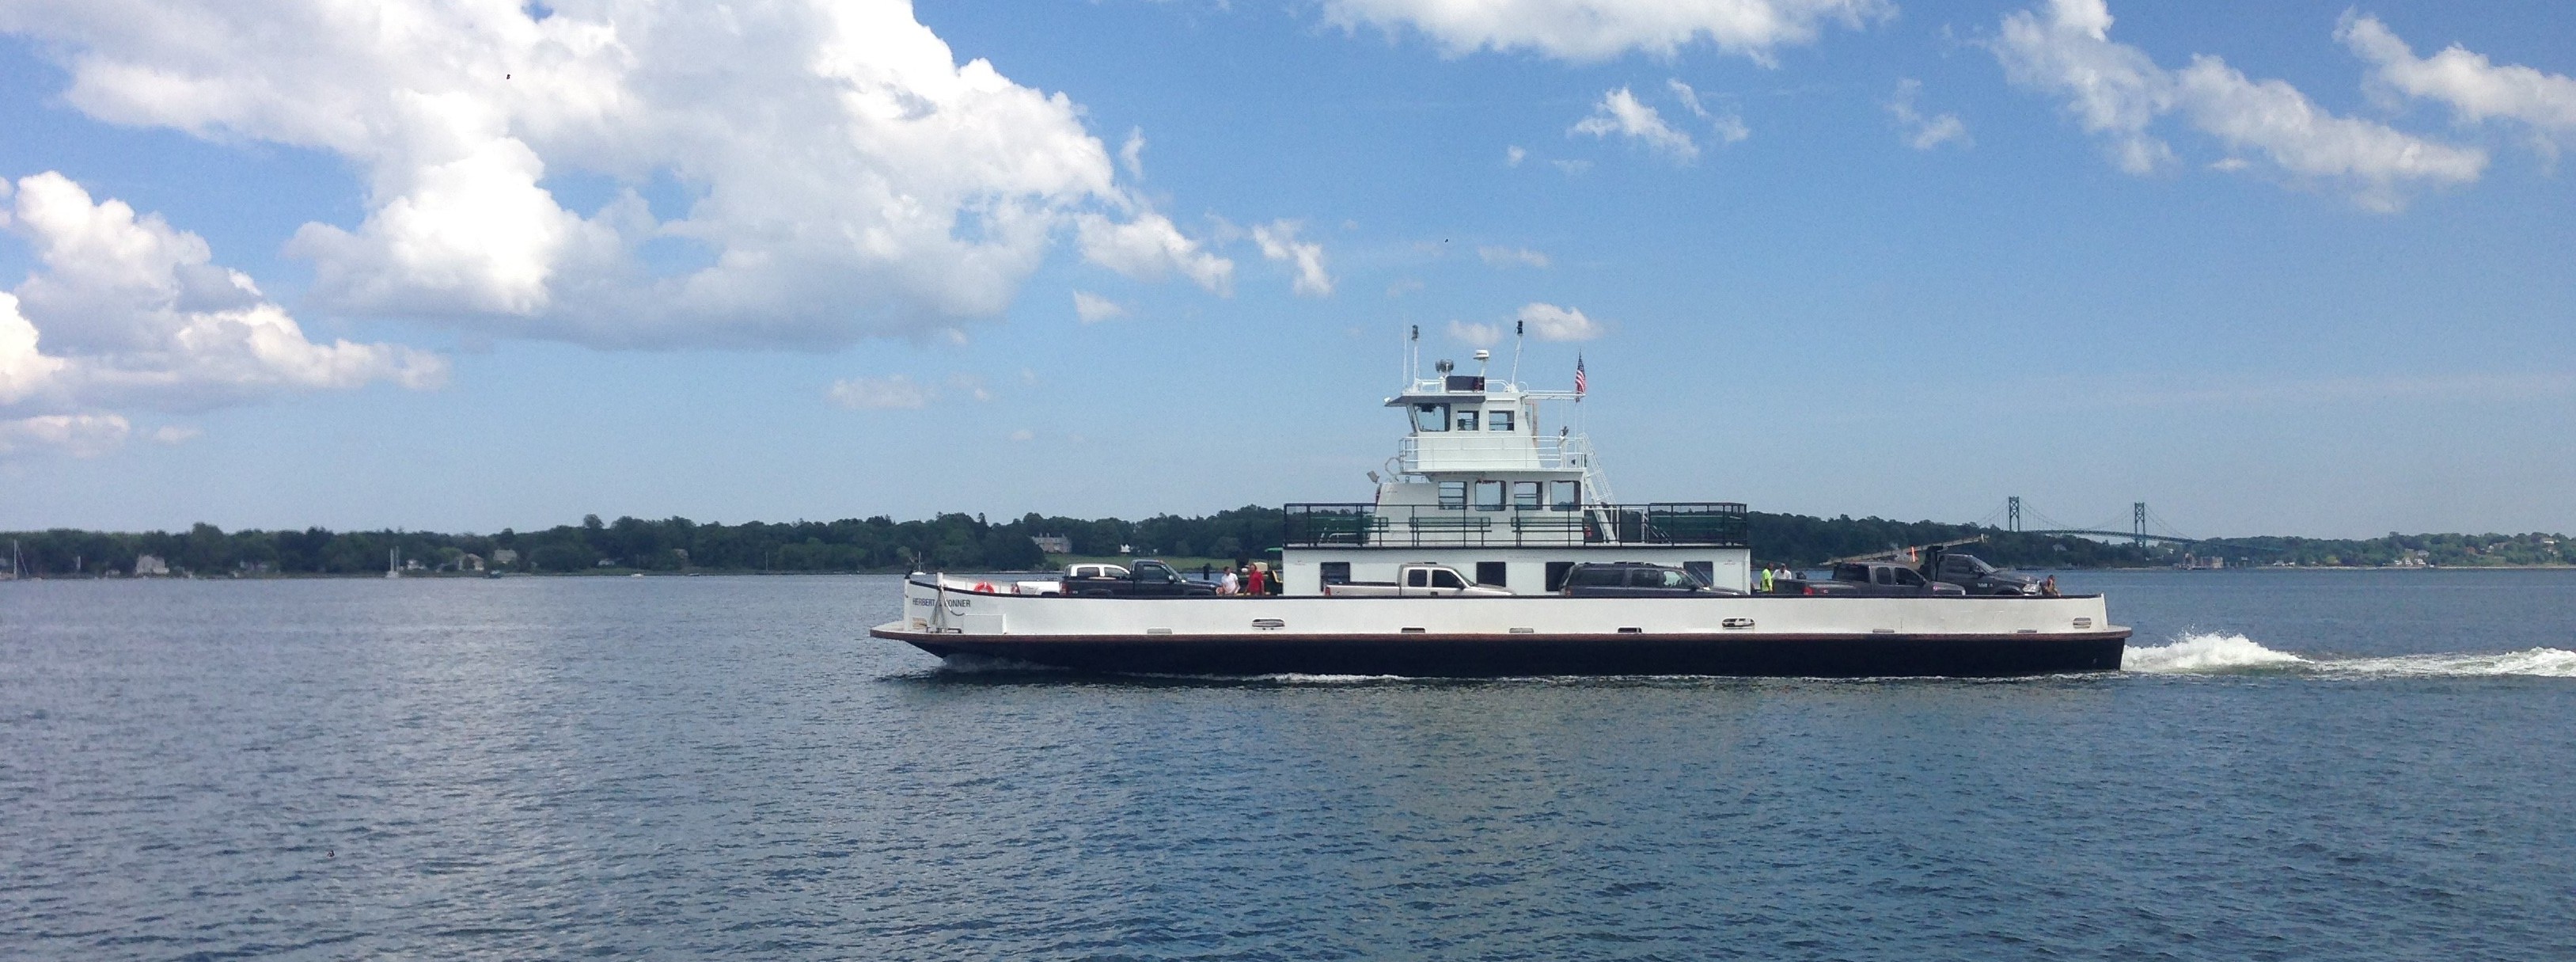 Prudence & Bay Islands Transport – A & R Marine Services